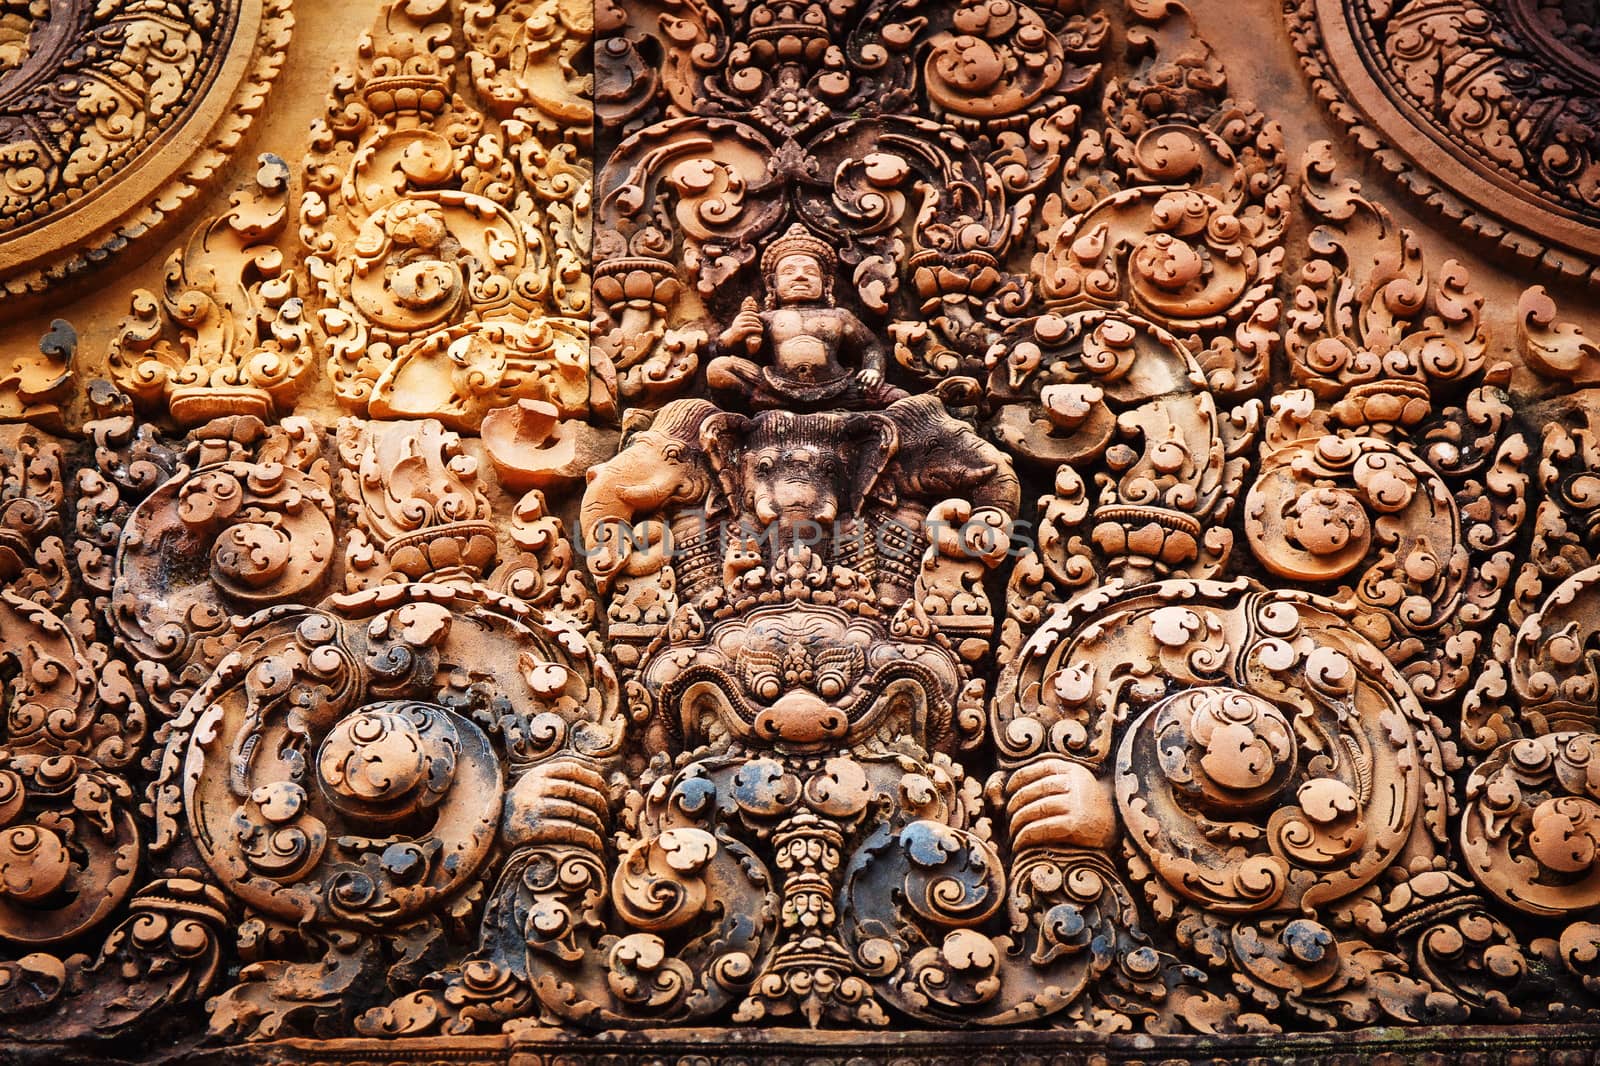 Khmer architecture in Banteay Srei temple that was built in 968, Siem Reap, Cambodia.